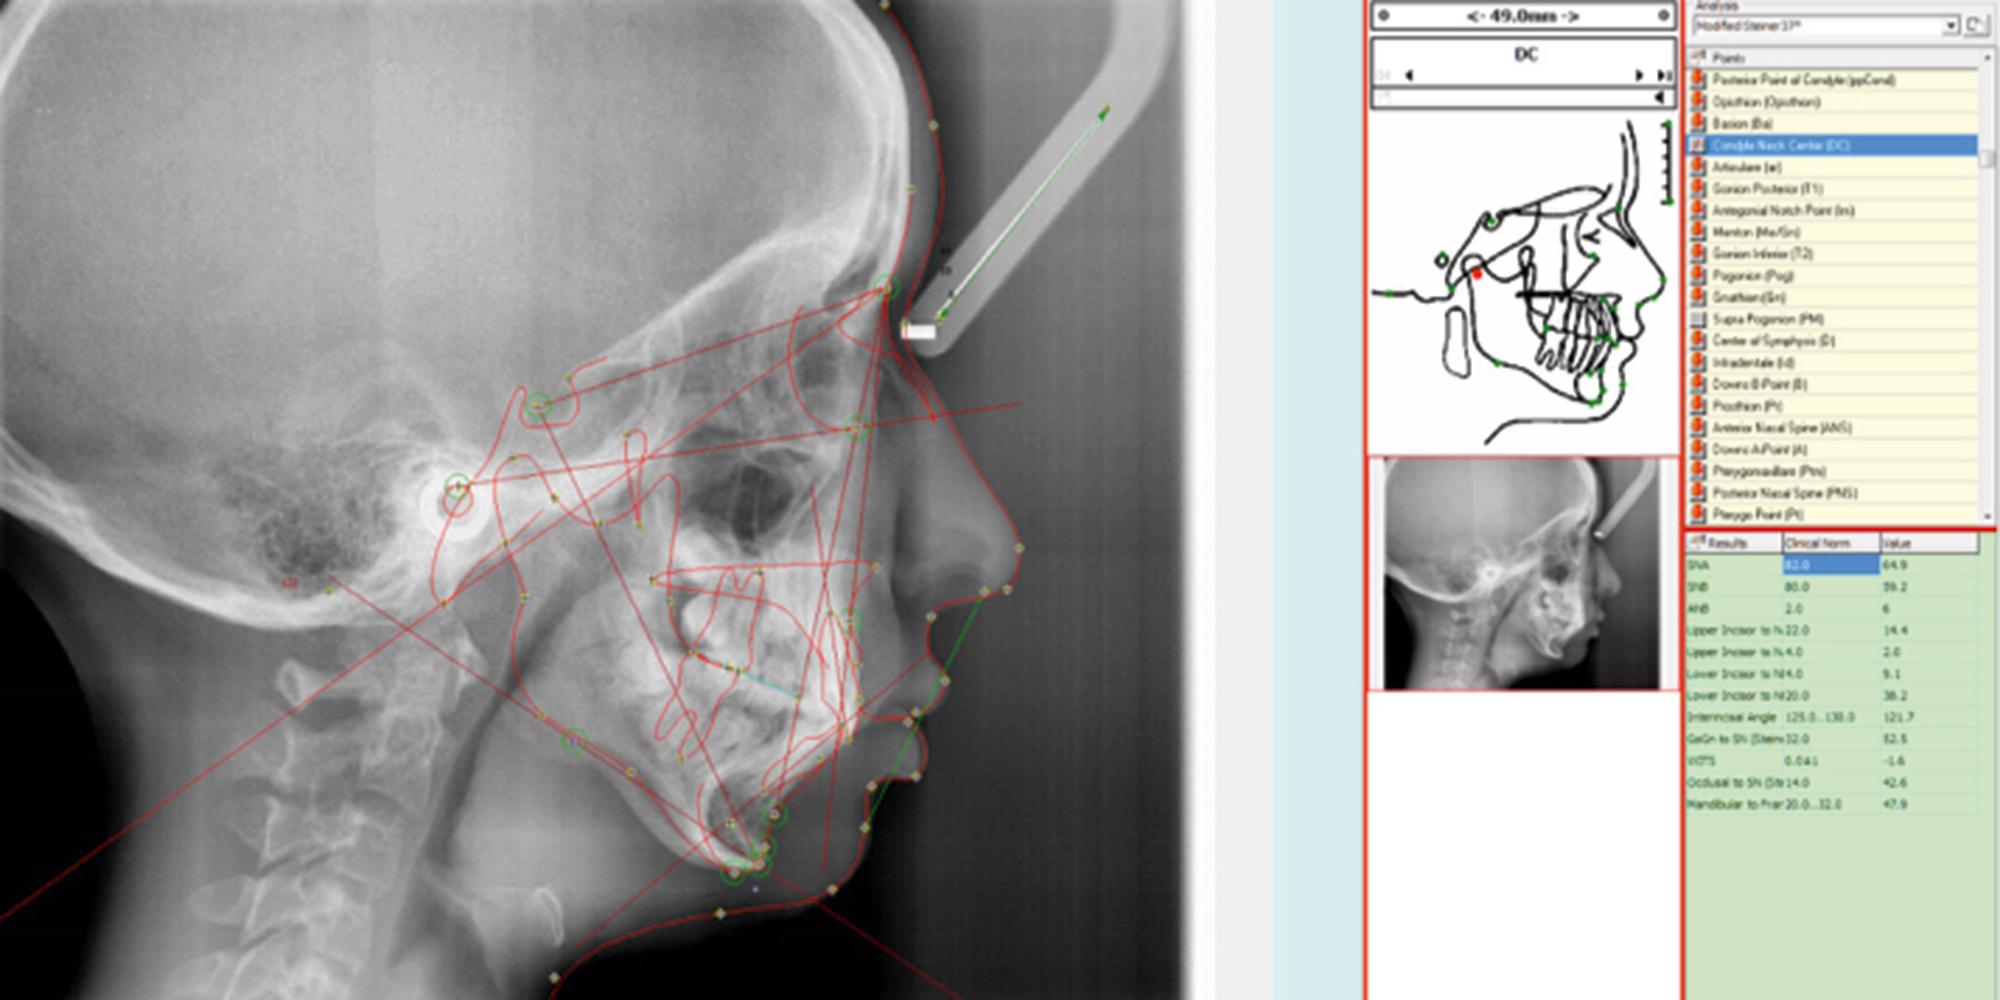 Fig. 21.12, Cephalometric tracings. Lateral cephalograms are used to plot specific anatomical landmarks that can further be analyzed using numerous software programs.